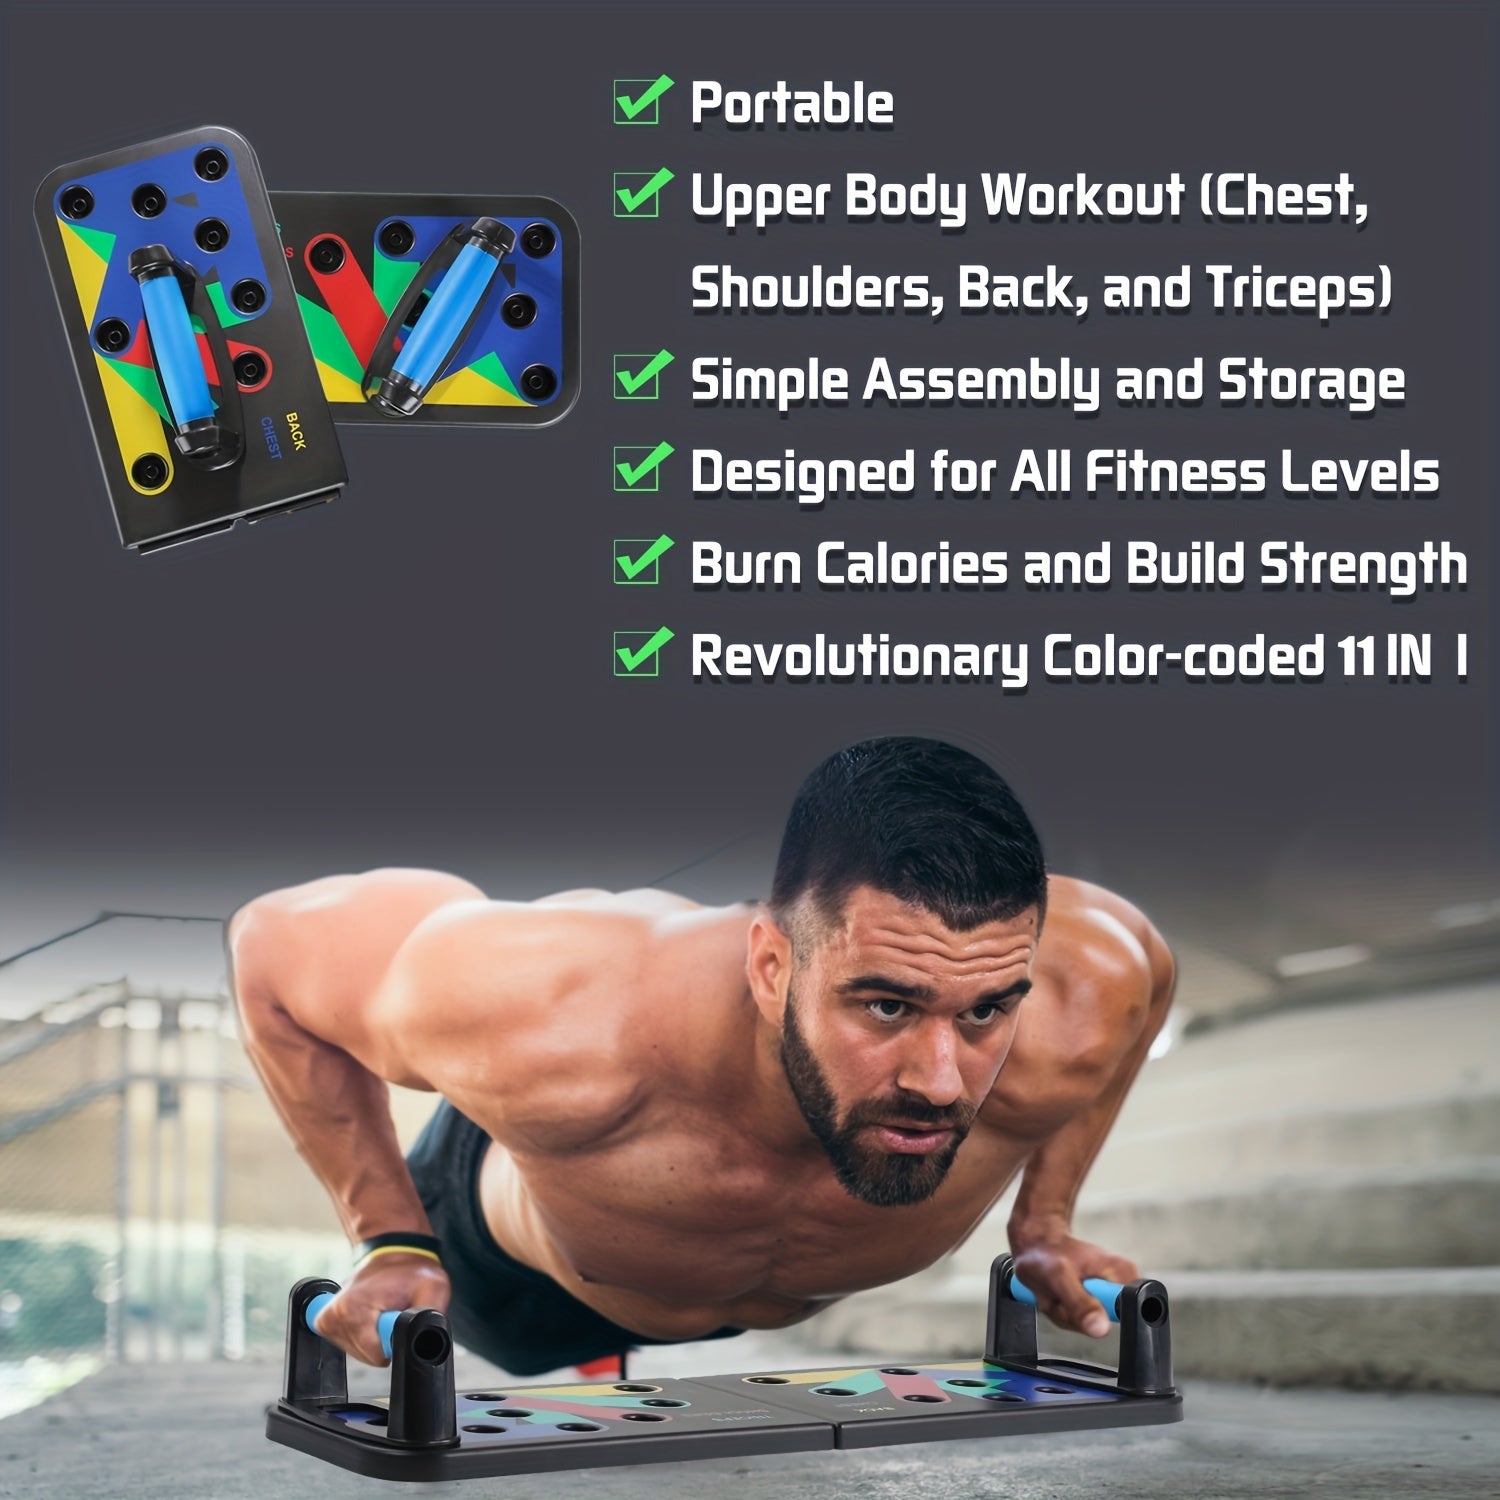 Get Fit Quickly with This Multifunctional Collapsible Push-up Board - Perfect for Chest, Arm